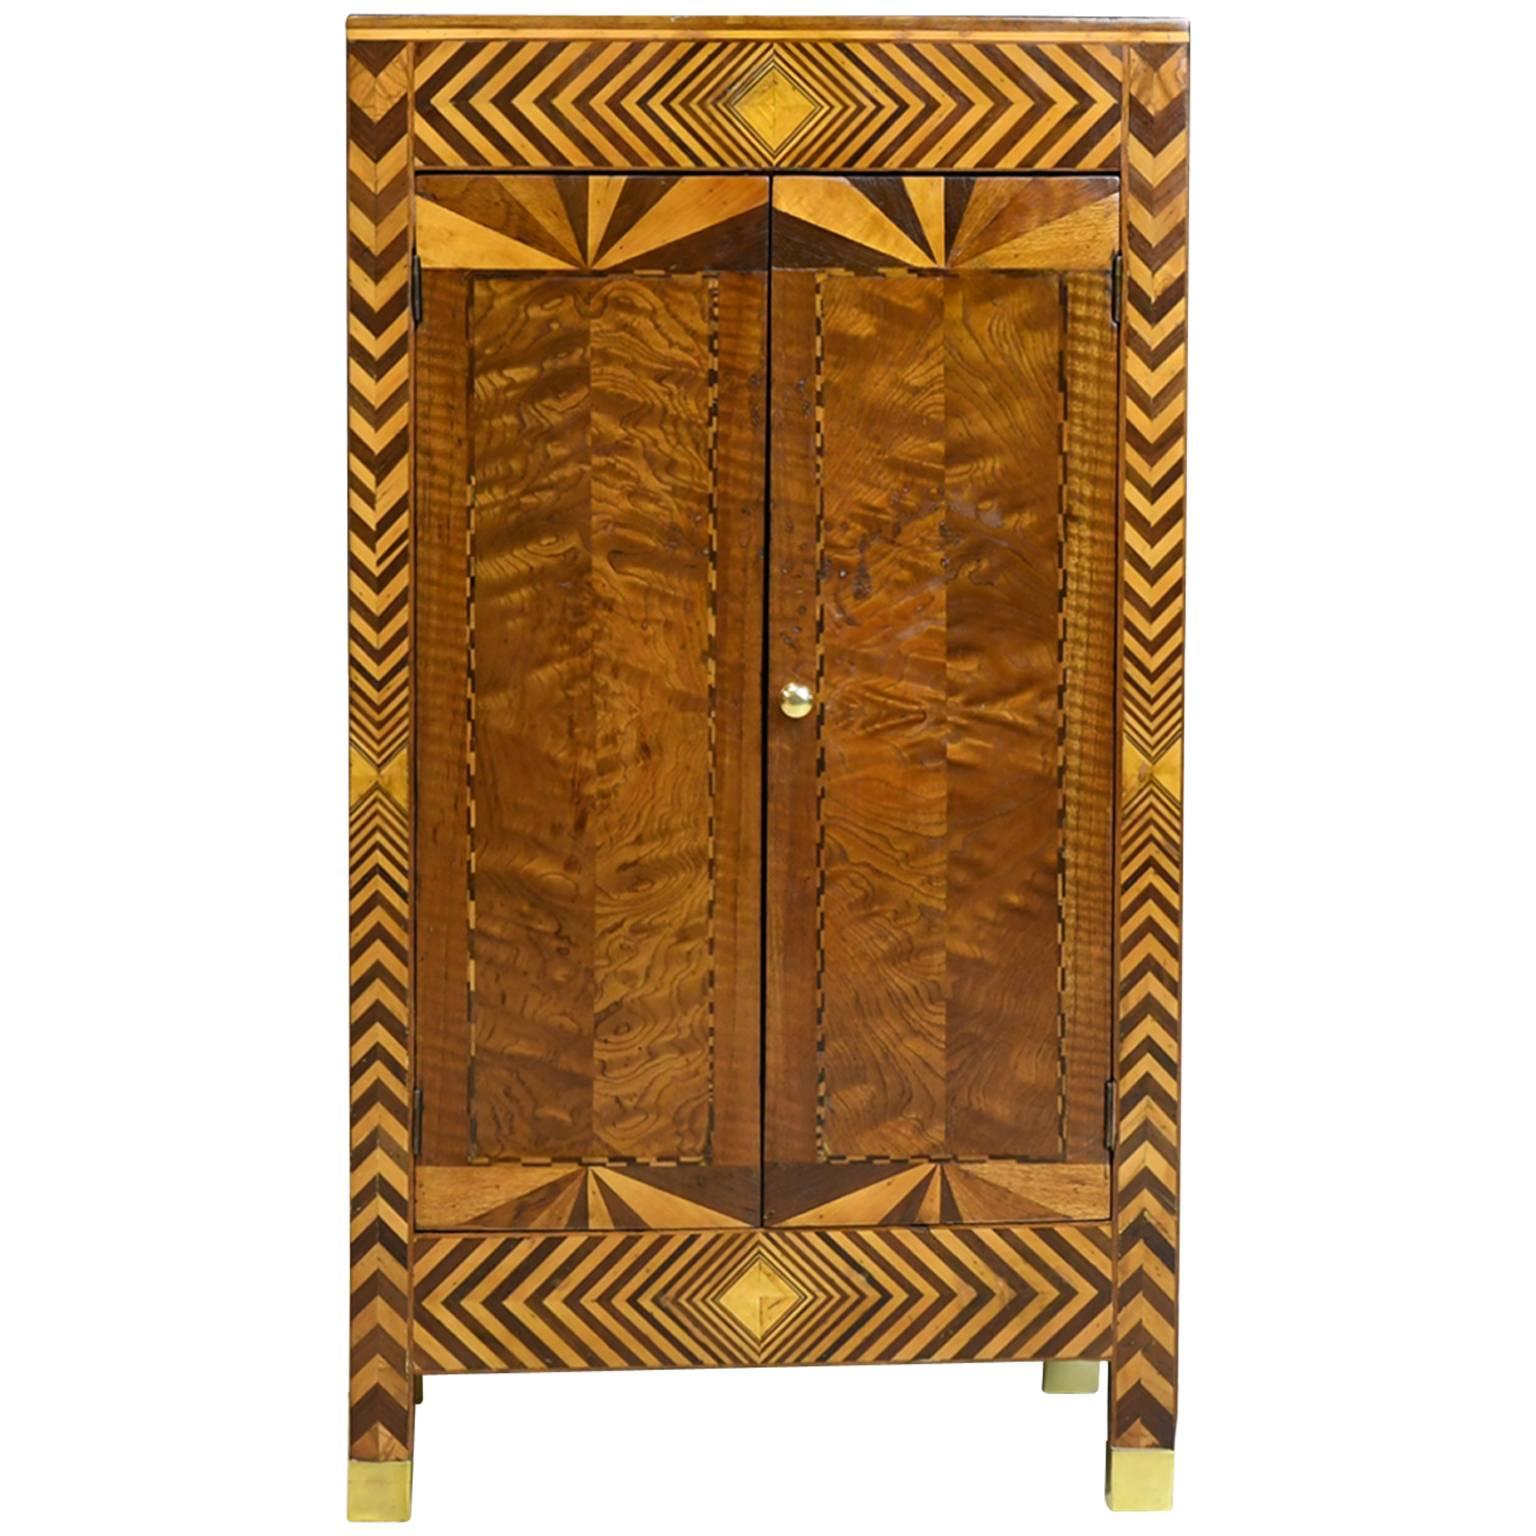 American Art Deco Cabinet with Marquetry Inlays, circa 1920s